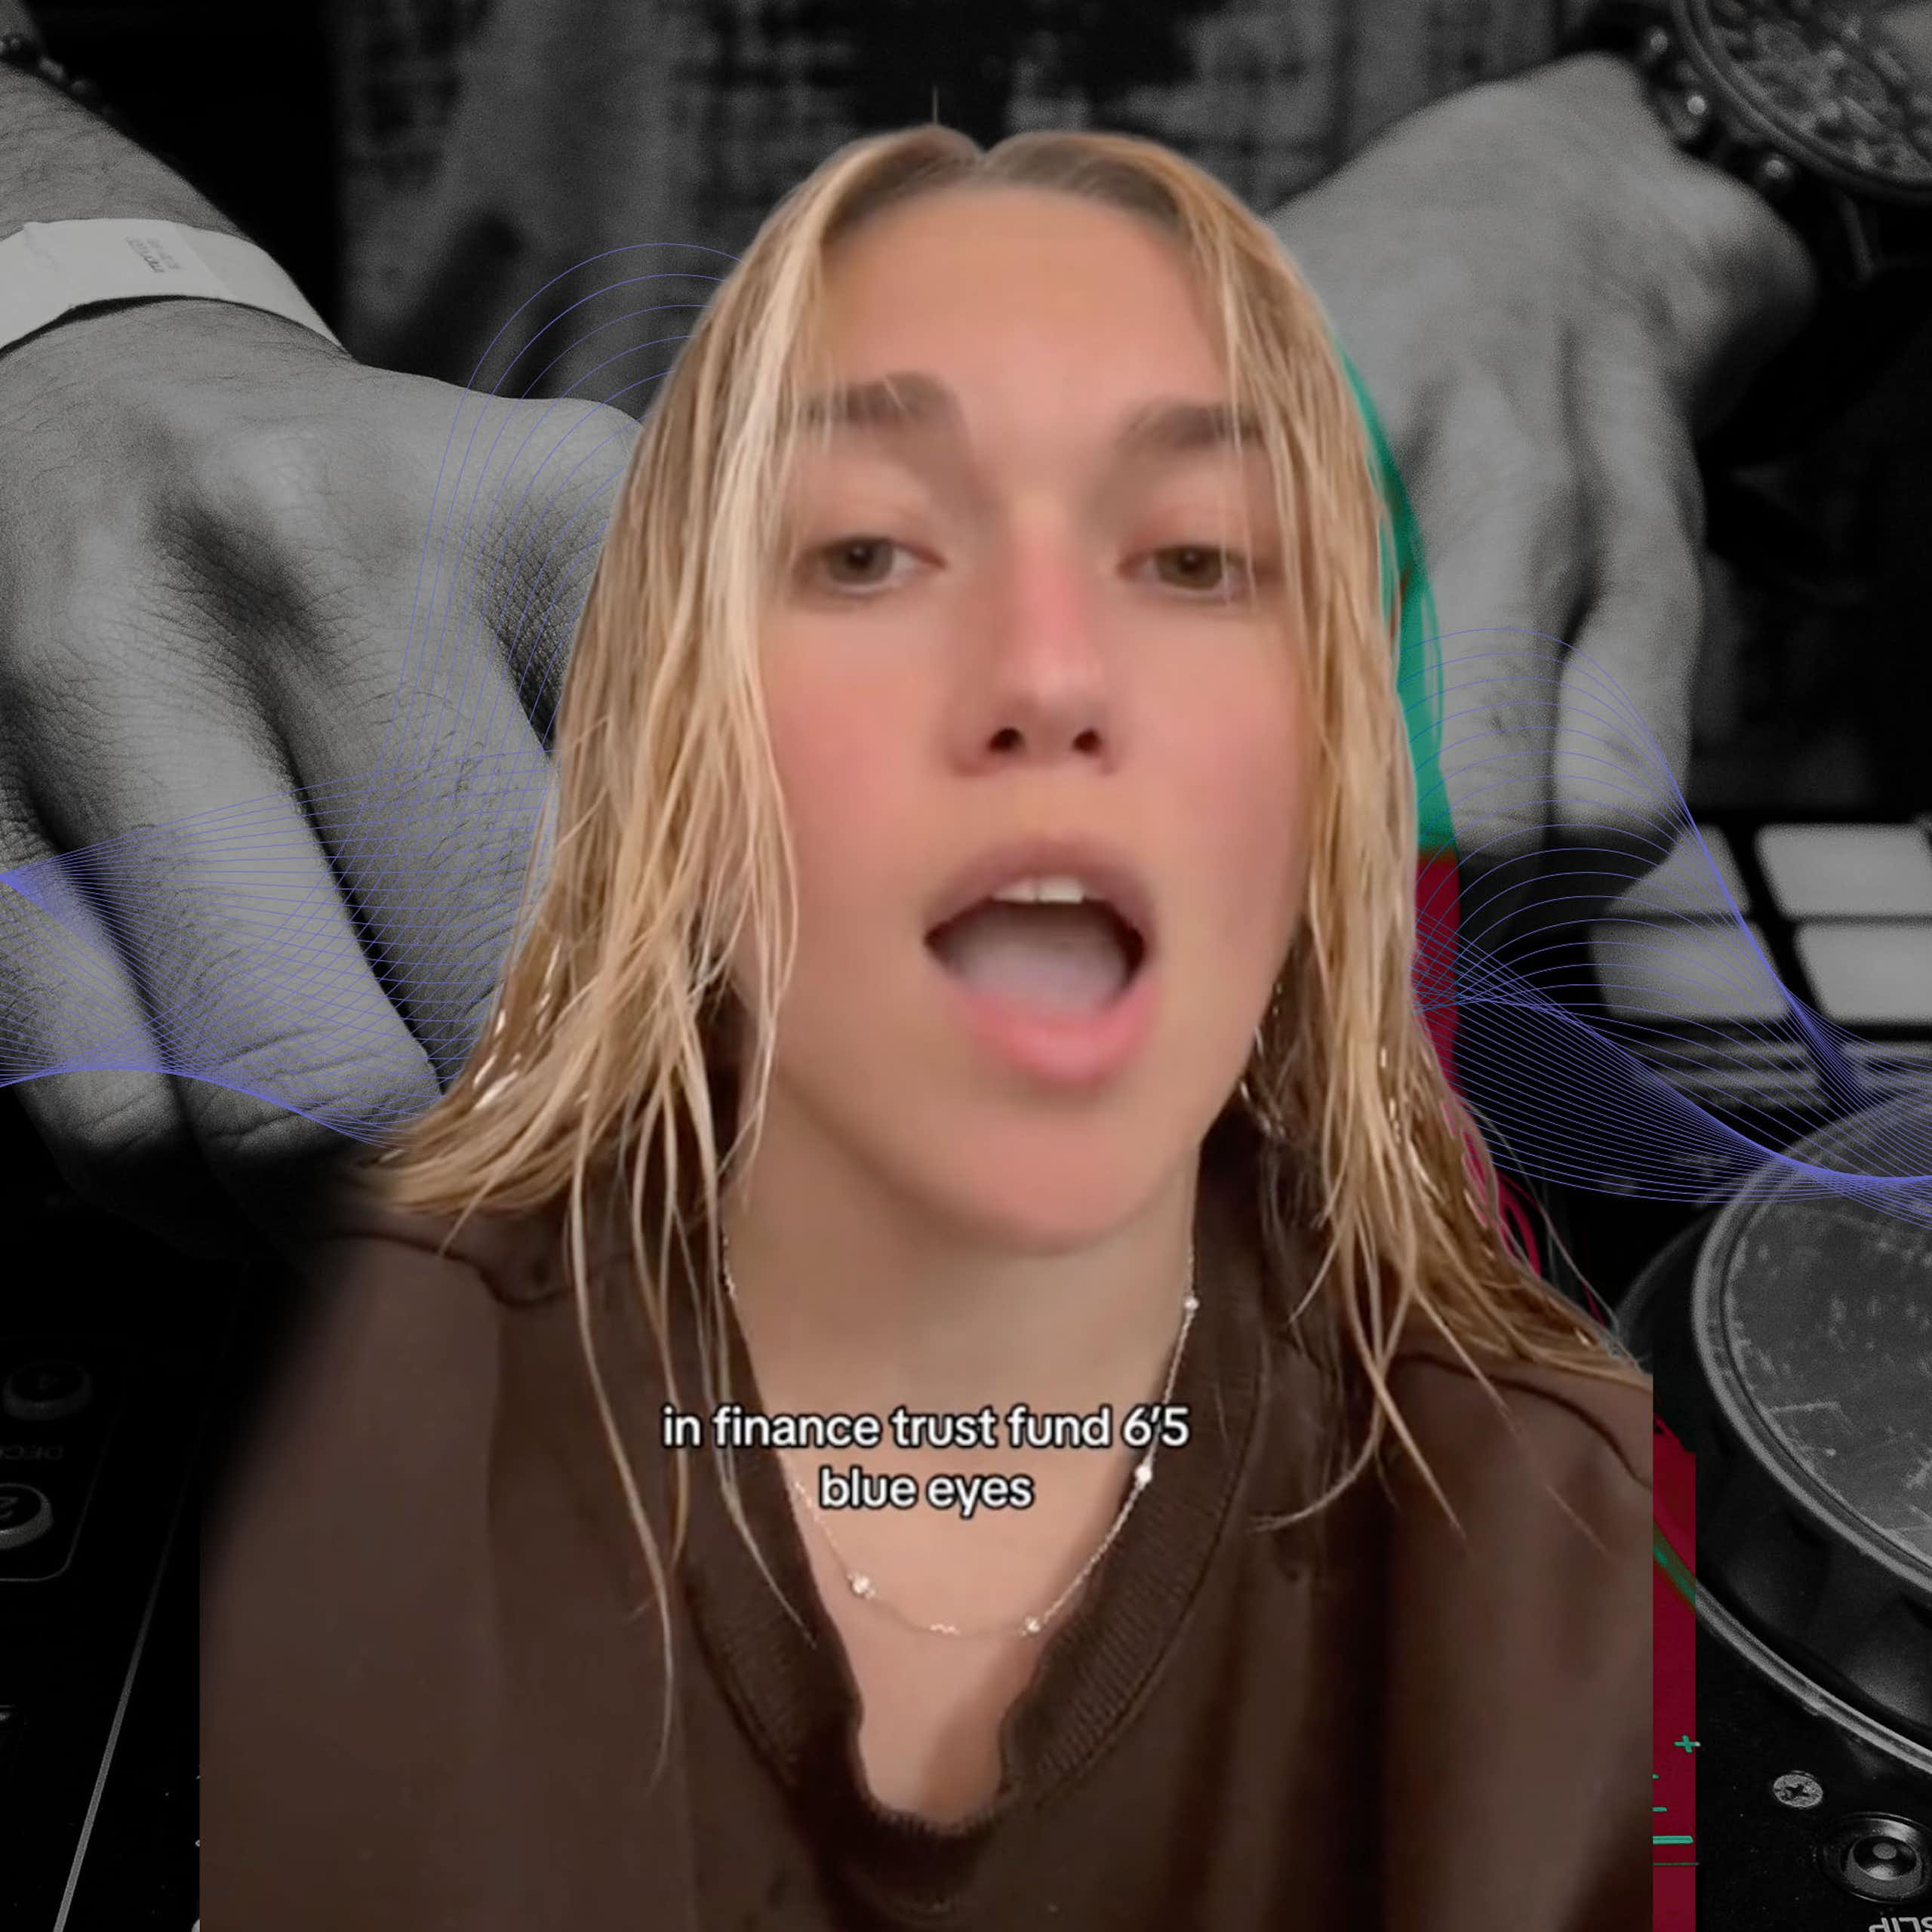 Composite image of girl_on_couch from TikTok and a DJ deck in the background